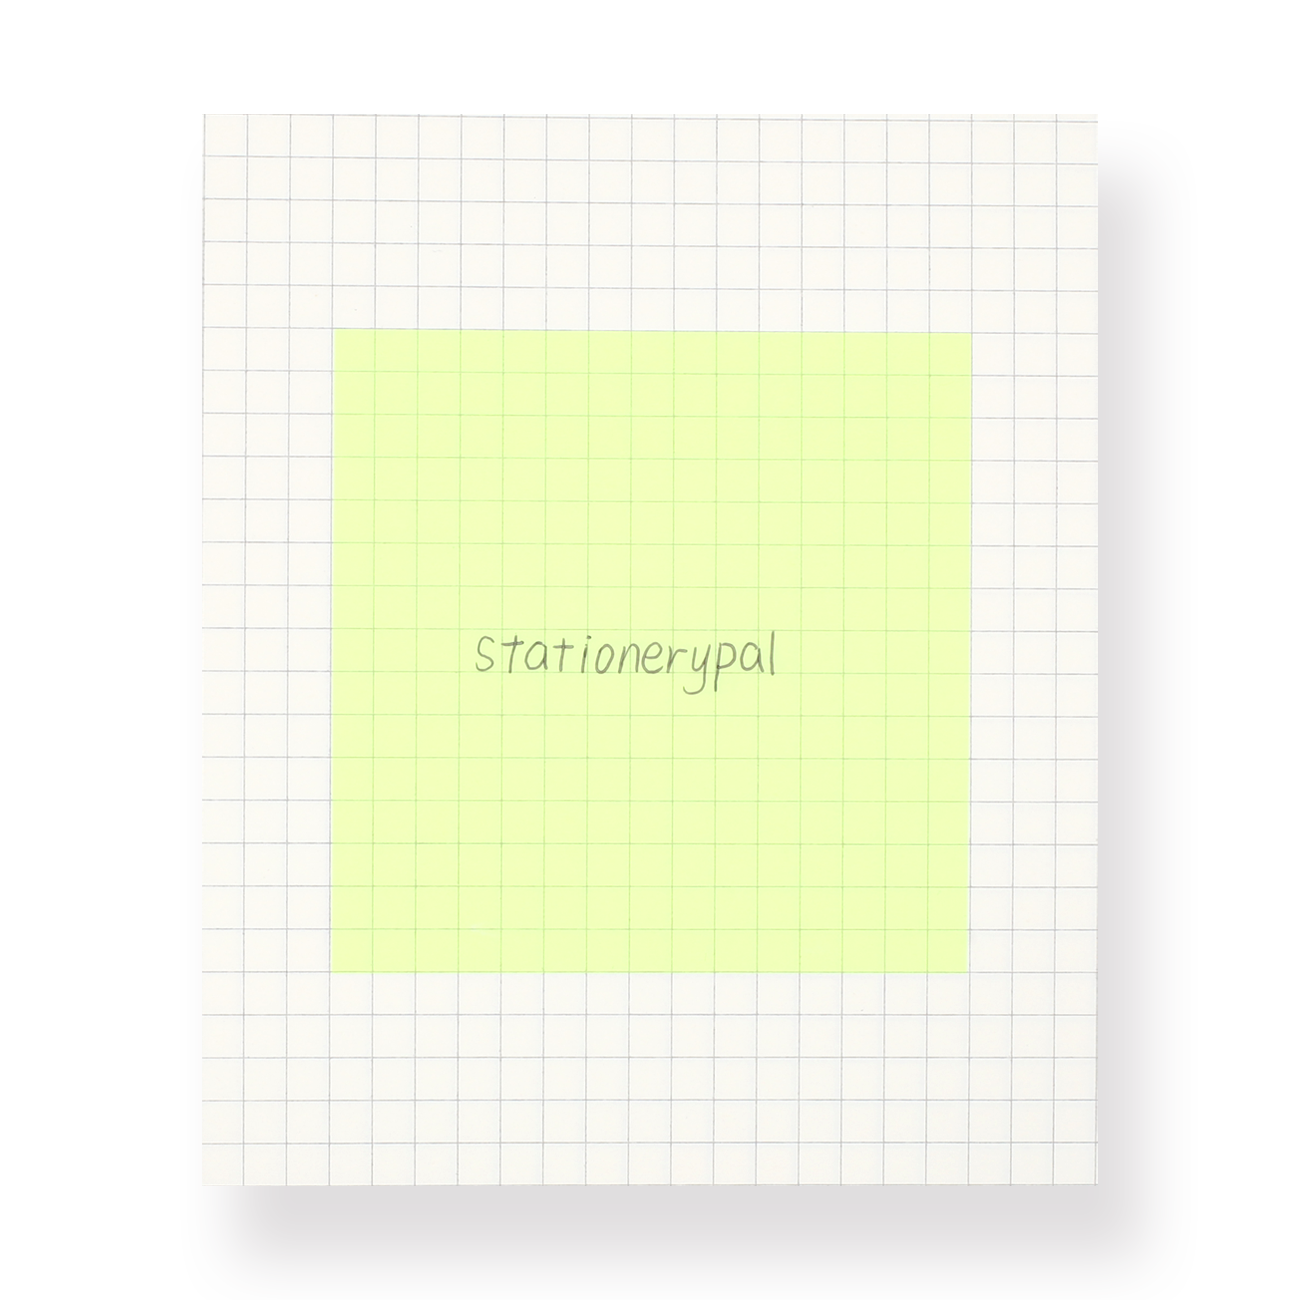 Sticky Note Printable Graph Paper  Printable graph paper, Sticky notes,  Graph paper